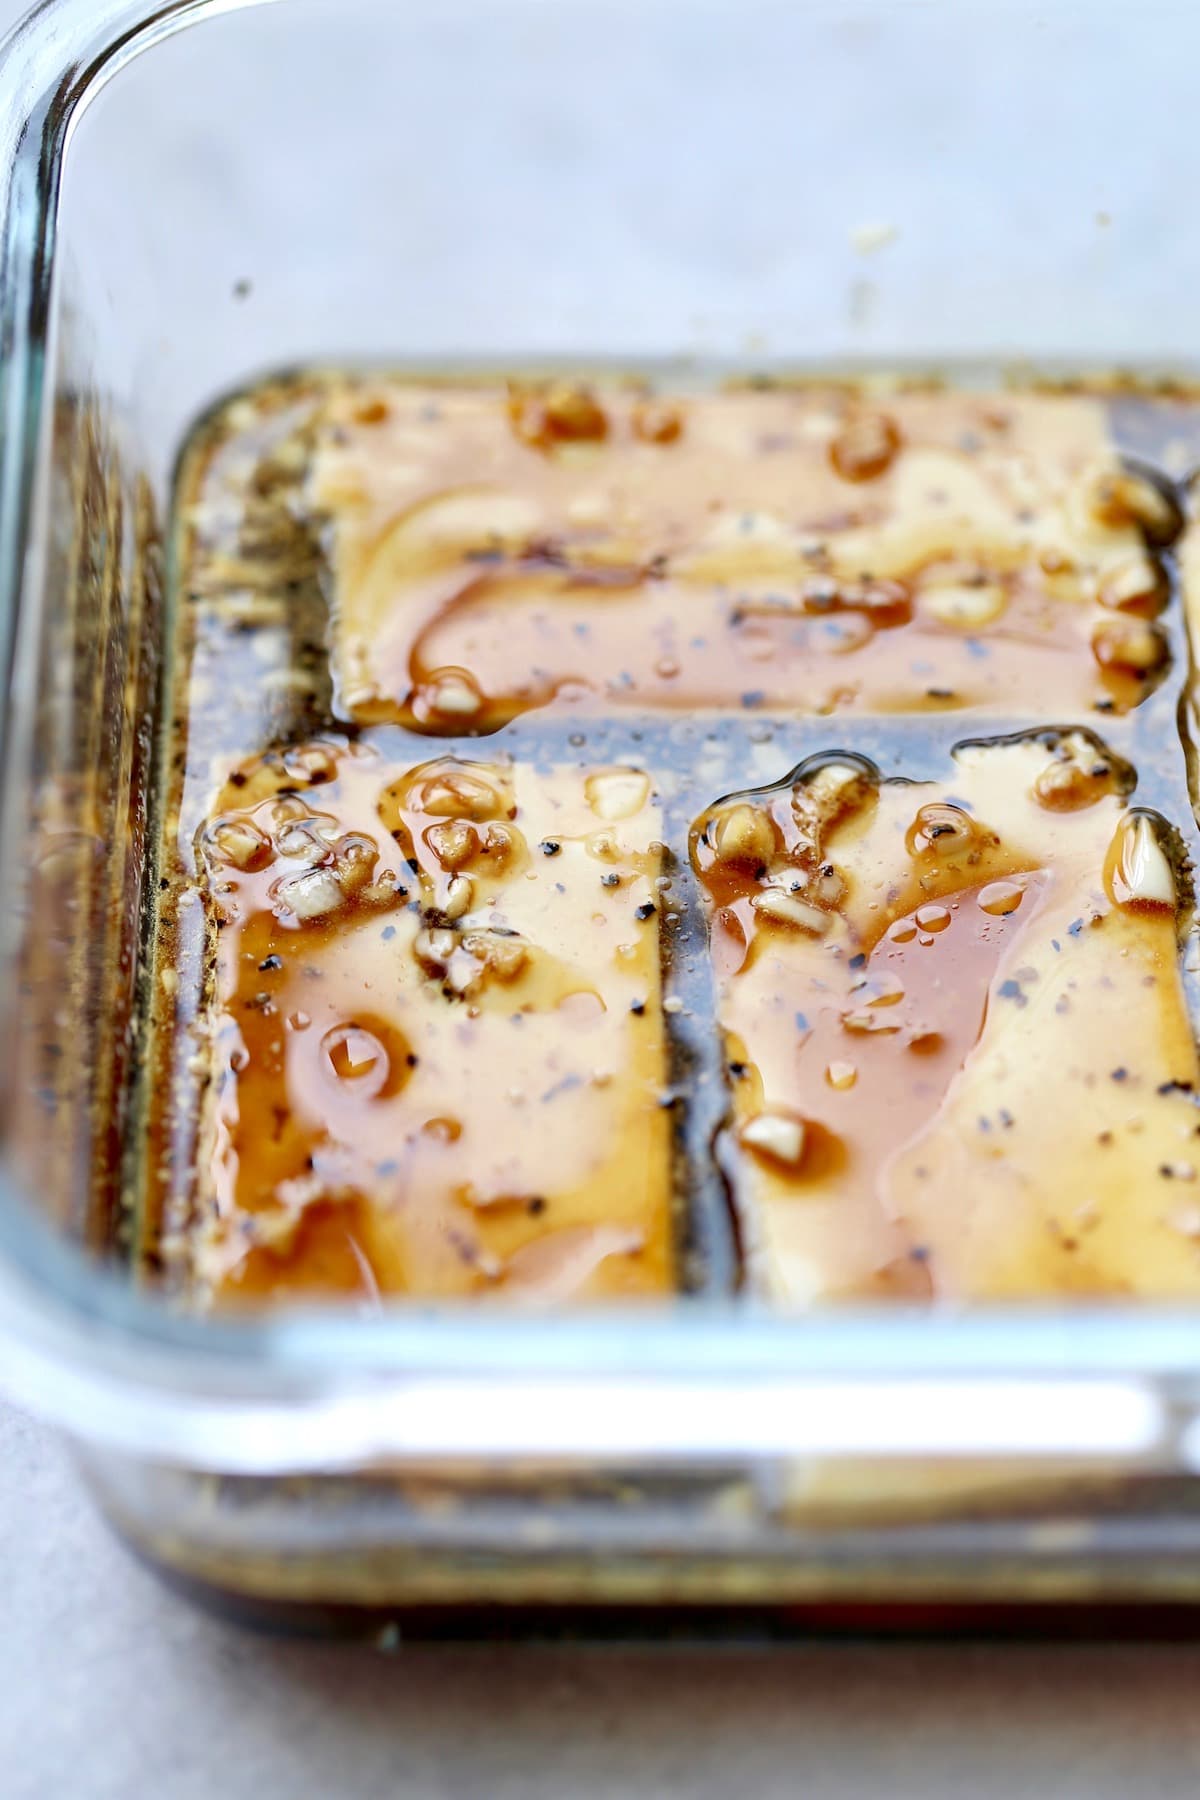 A 45 degree angle of tofu marinating in a glass dish with lots of fresh garlic, soy sauce and black pepper. 